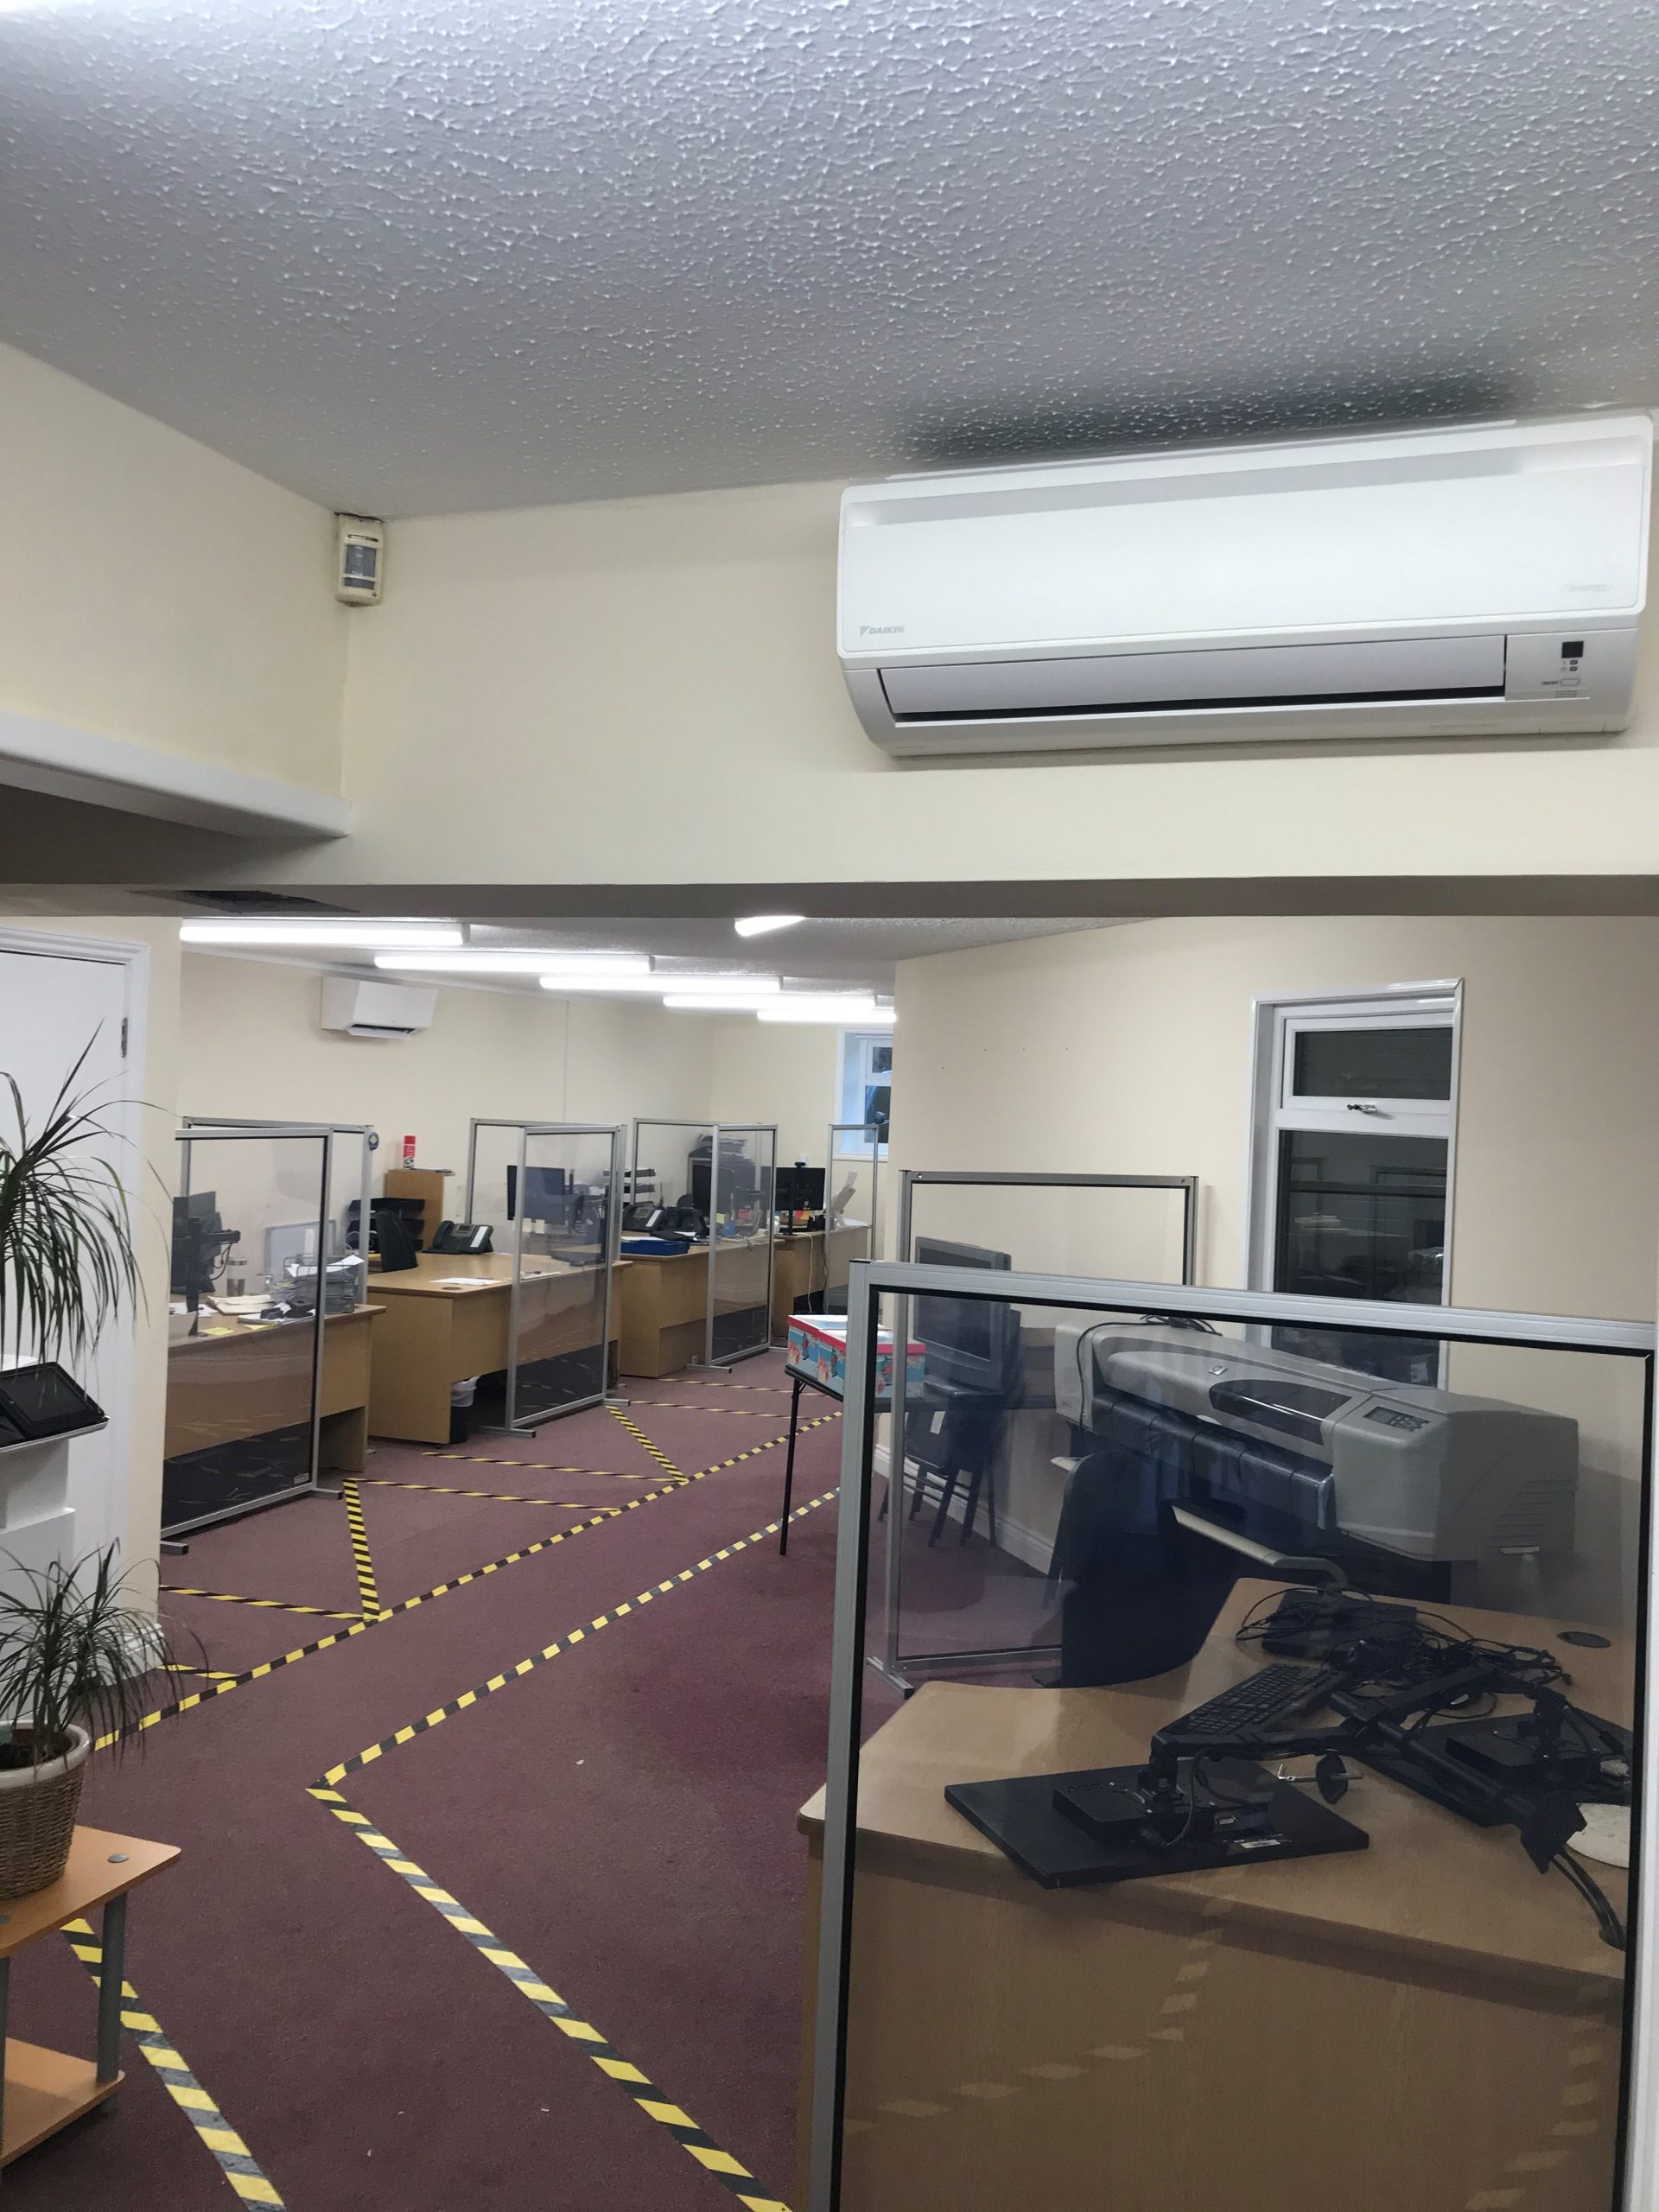 https://thermalair.co.uk/wp-content/uploads/2022/01/Office-air-conditioning-scaled.jpg